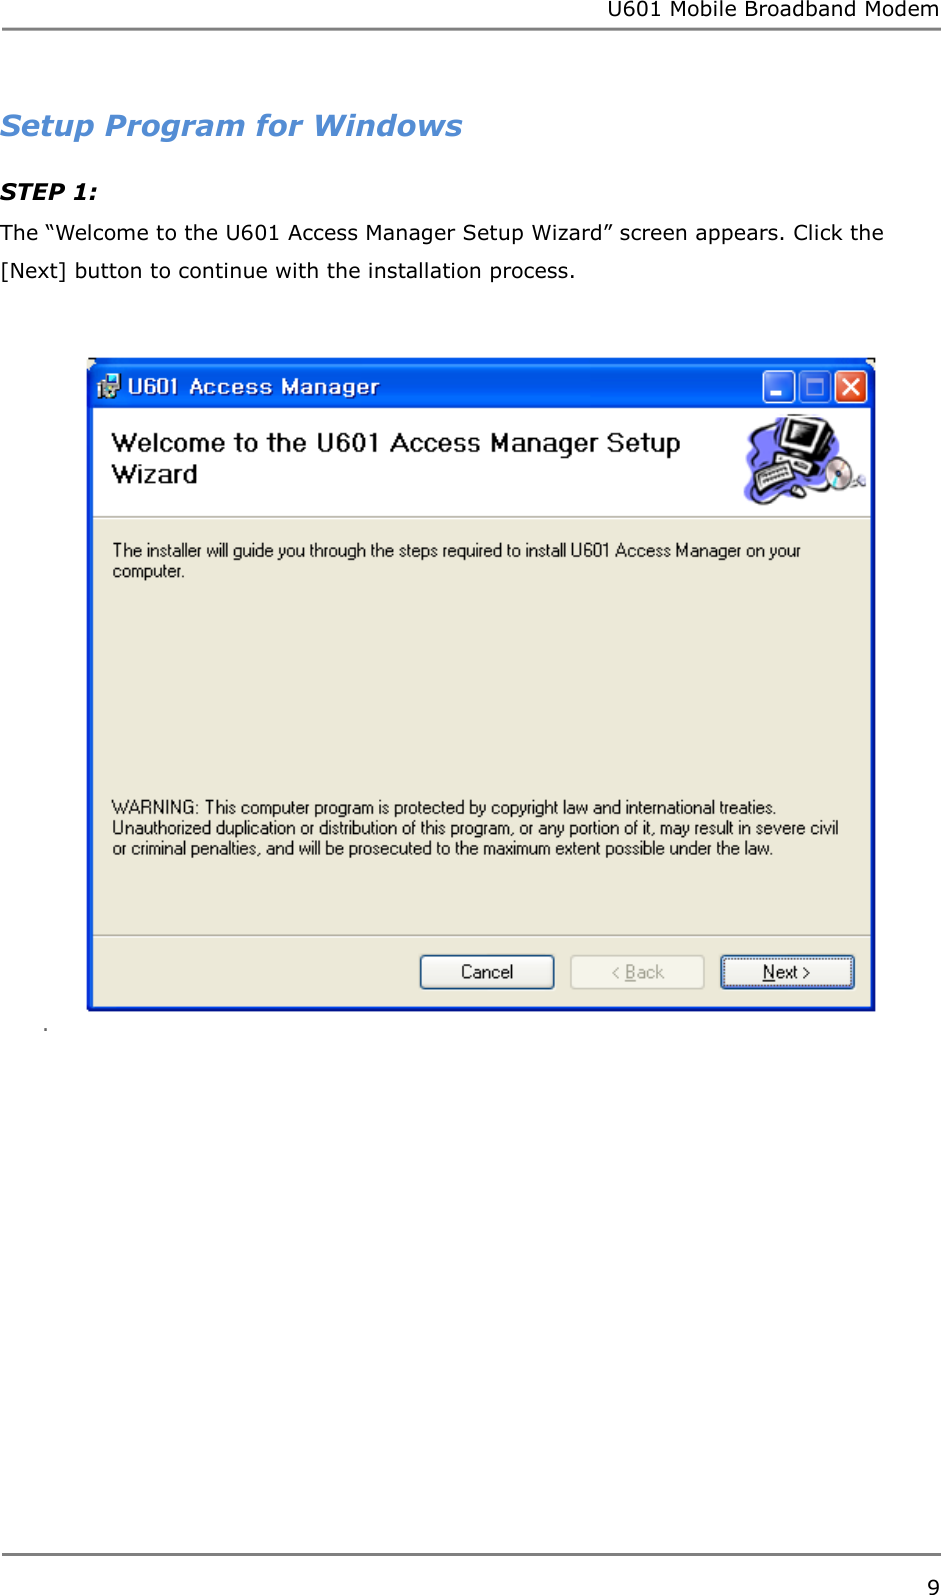 U601 Mobile Broadband Modem 9  Setup Program for Windows STEP 1:  The “Welcome to the U601 Access Manager Setup Wizard” screen appears. Click the [Next] button to continue with the installation process.  .               